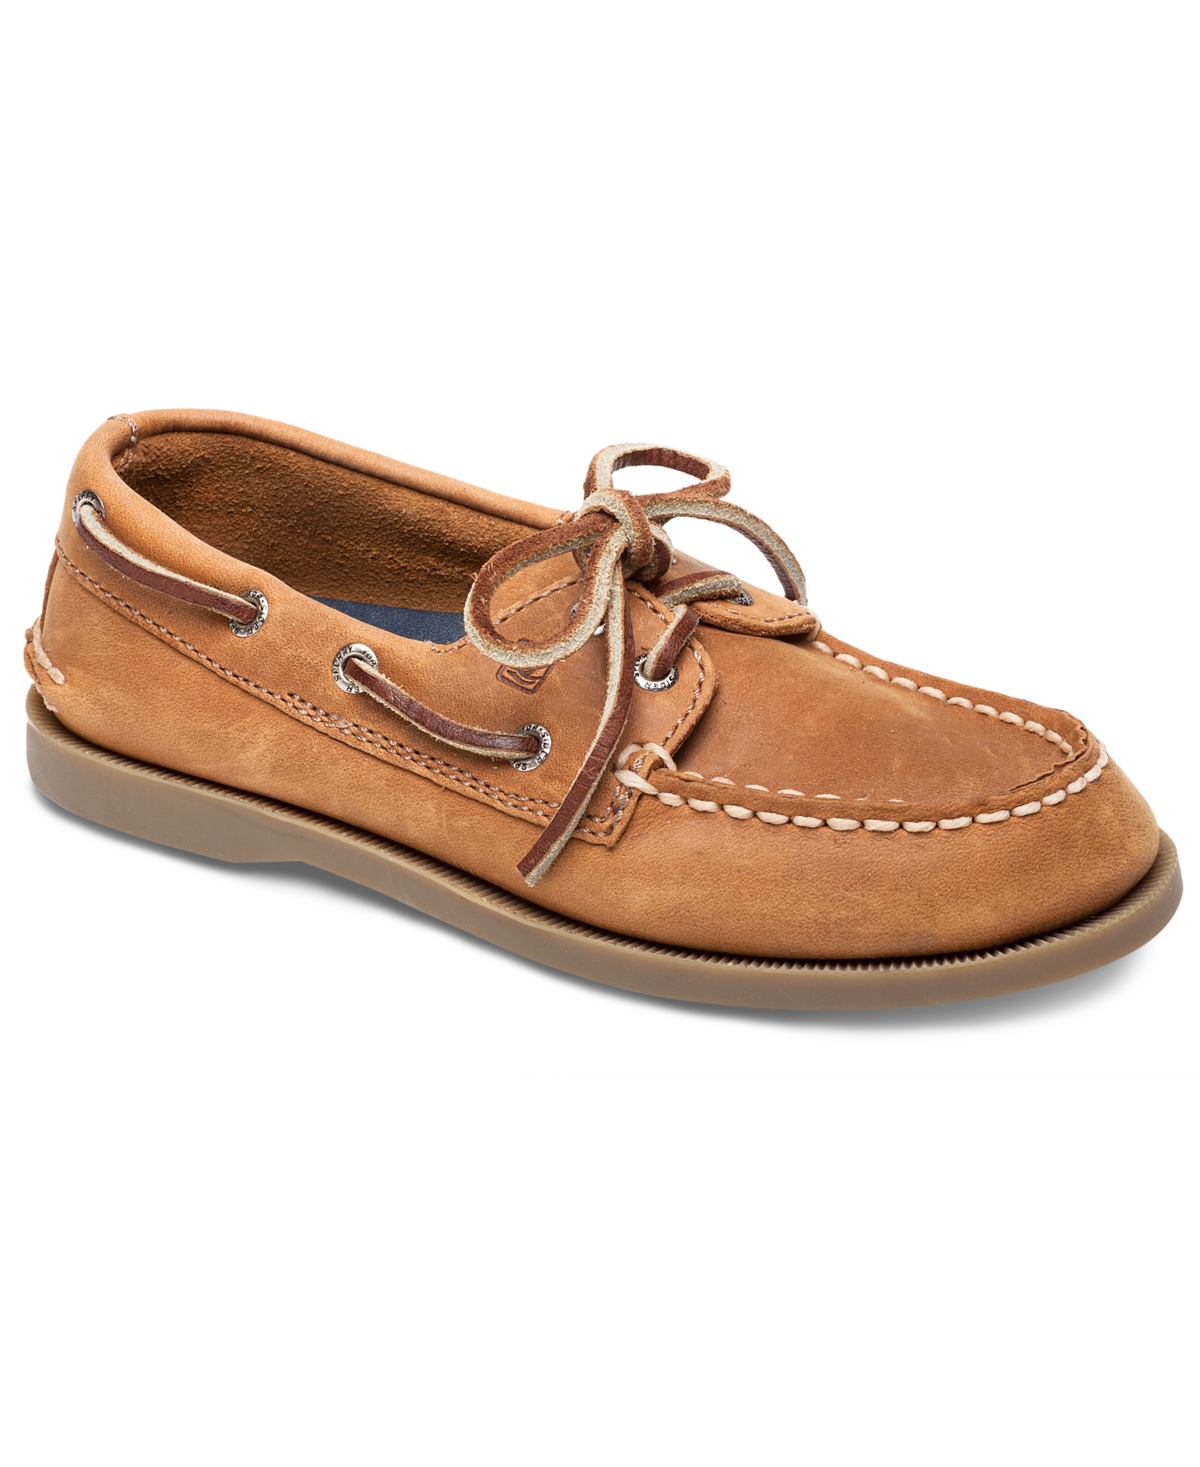 SPERRY TODDLER BOYS A/O BOAT SHOES FROM FINISH LINE